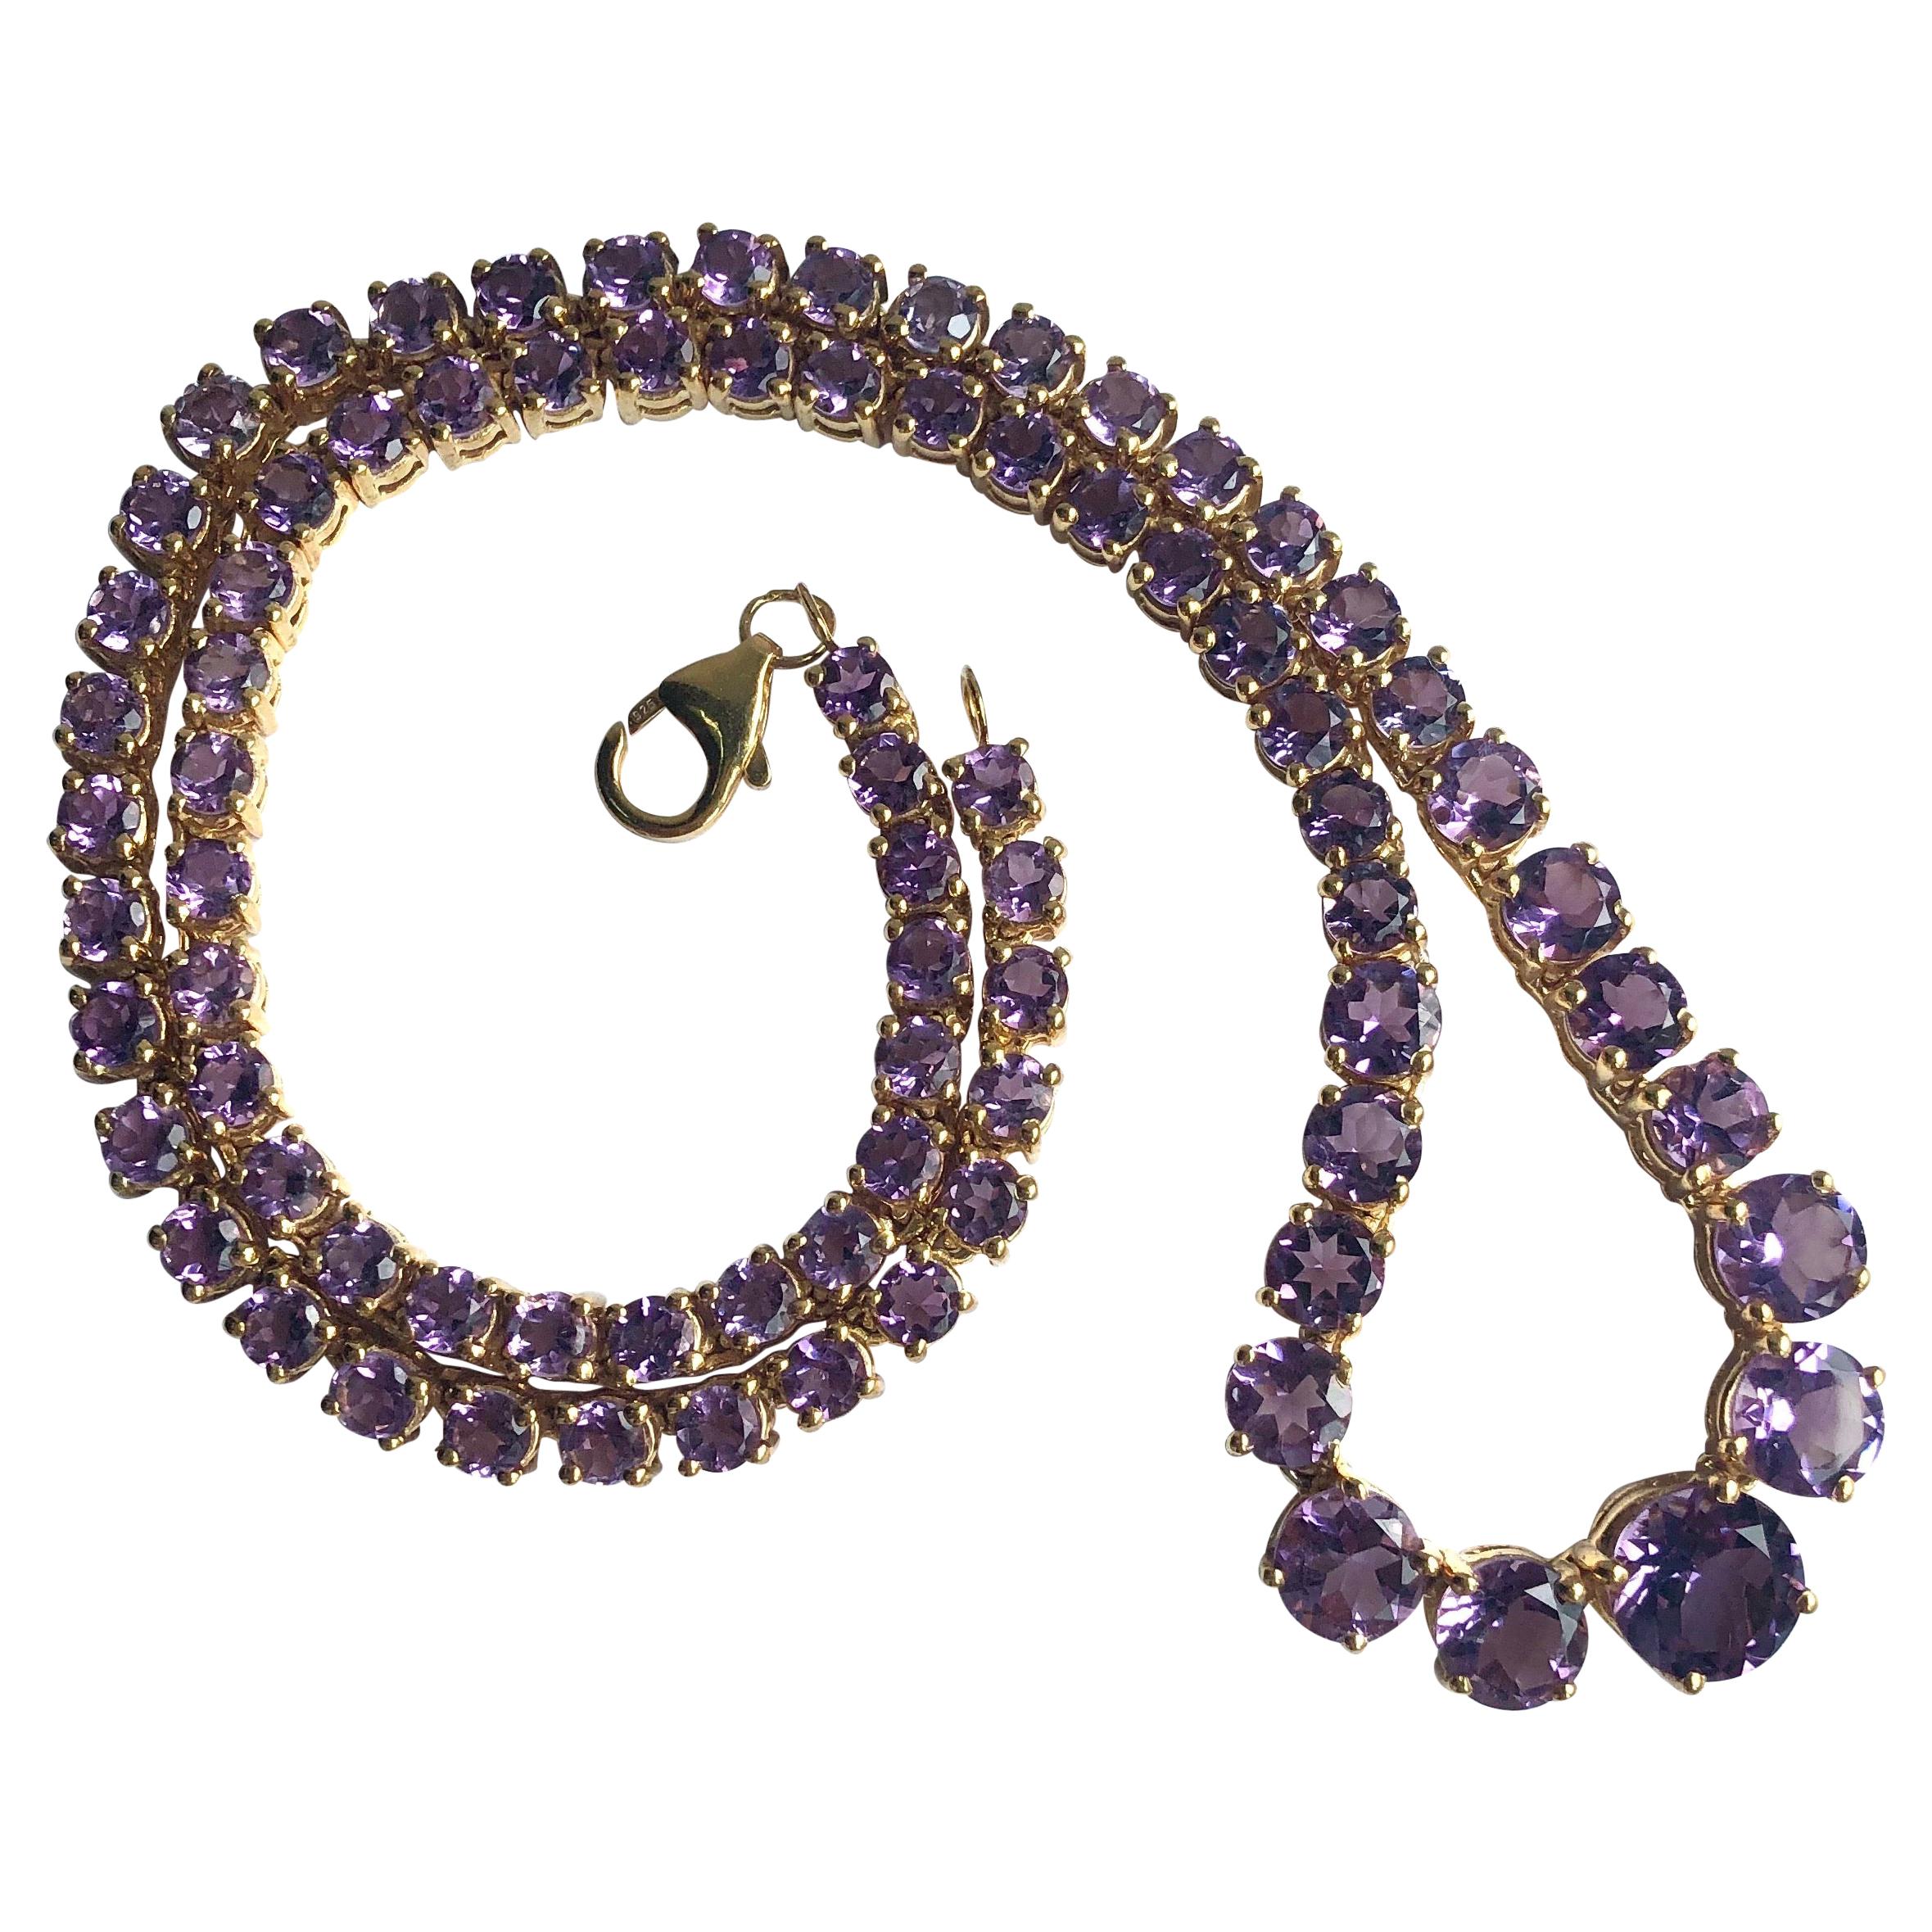 Vintage Amethyst and Silver Gilt Riviere Necklace